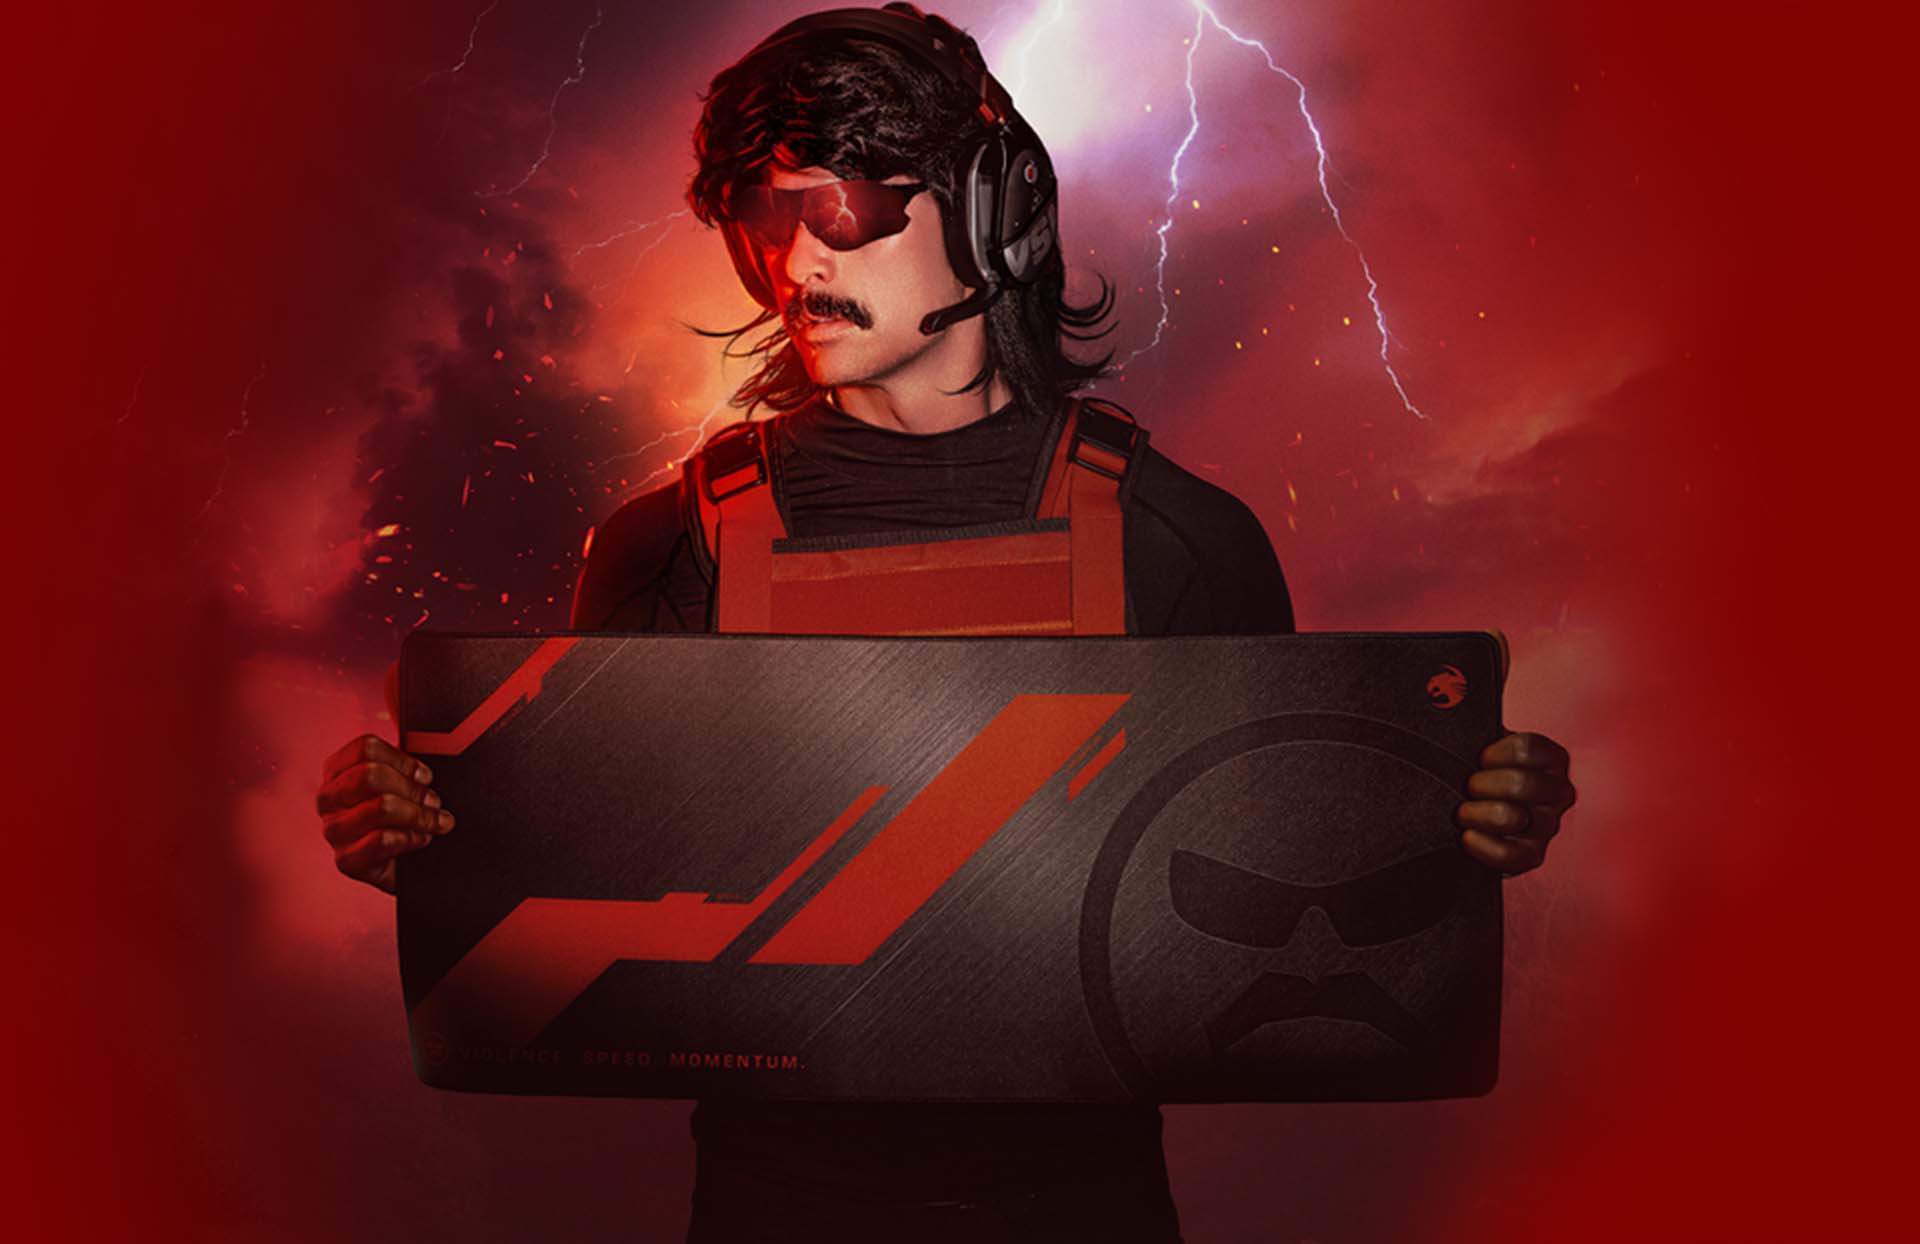 free gift with dr disrespect stealth 700 gen 2 max l.e. headset purchase